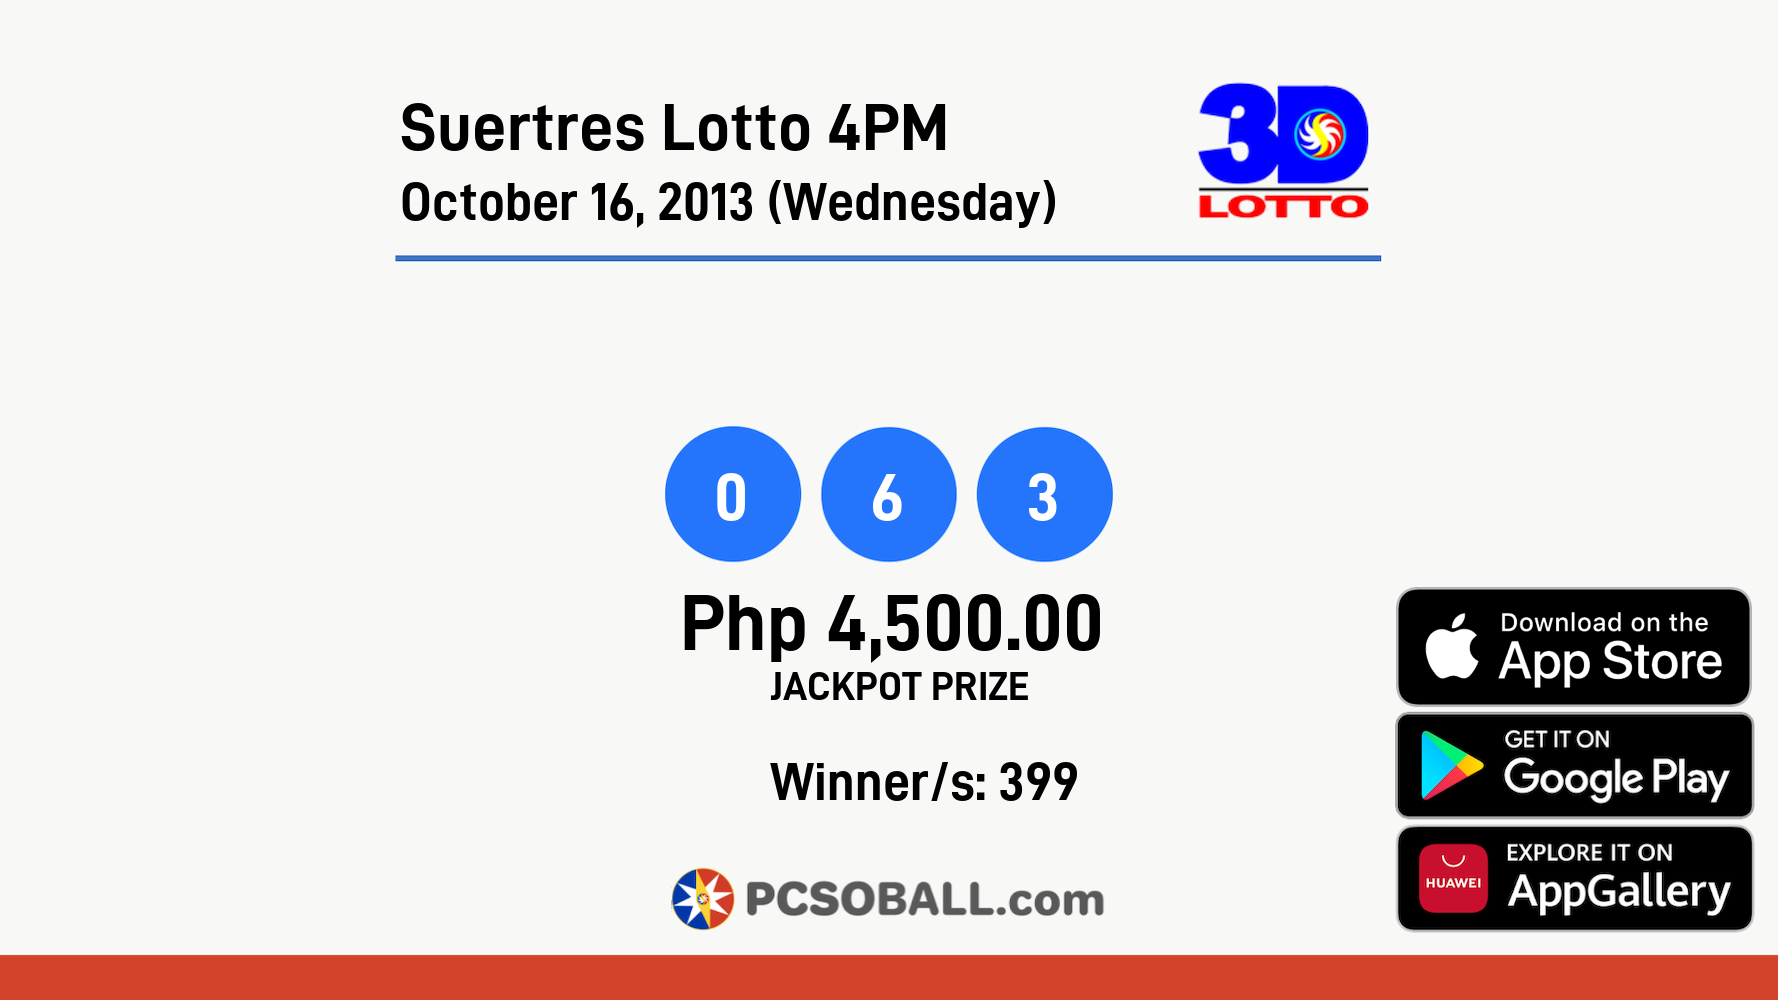 Suertres Lotto 4PM October 16, 2013 (Wednesday) Result